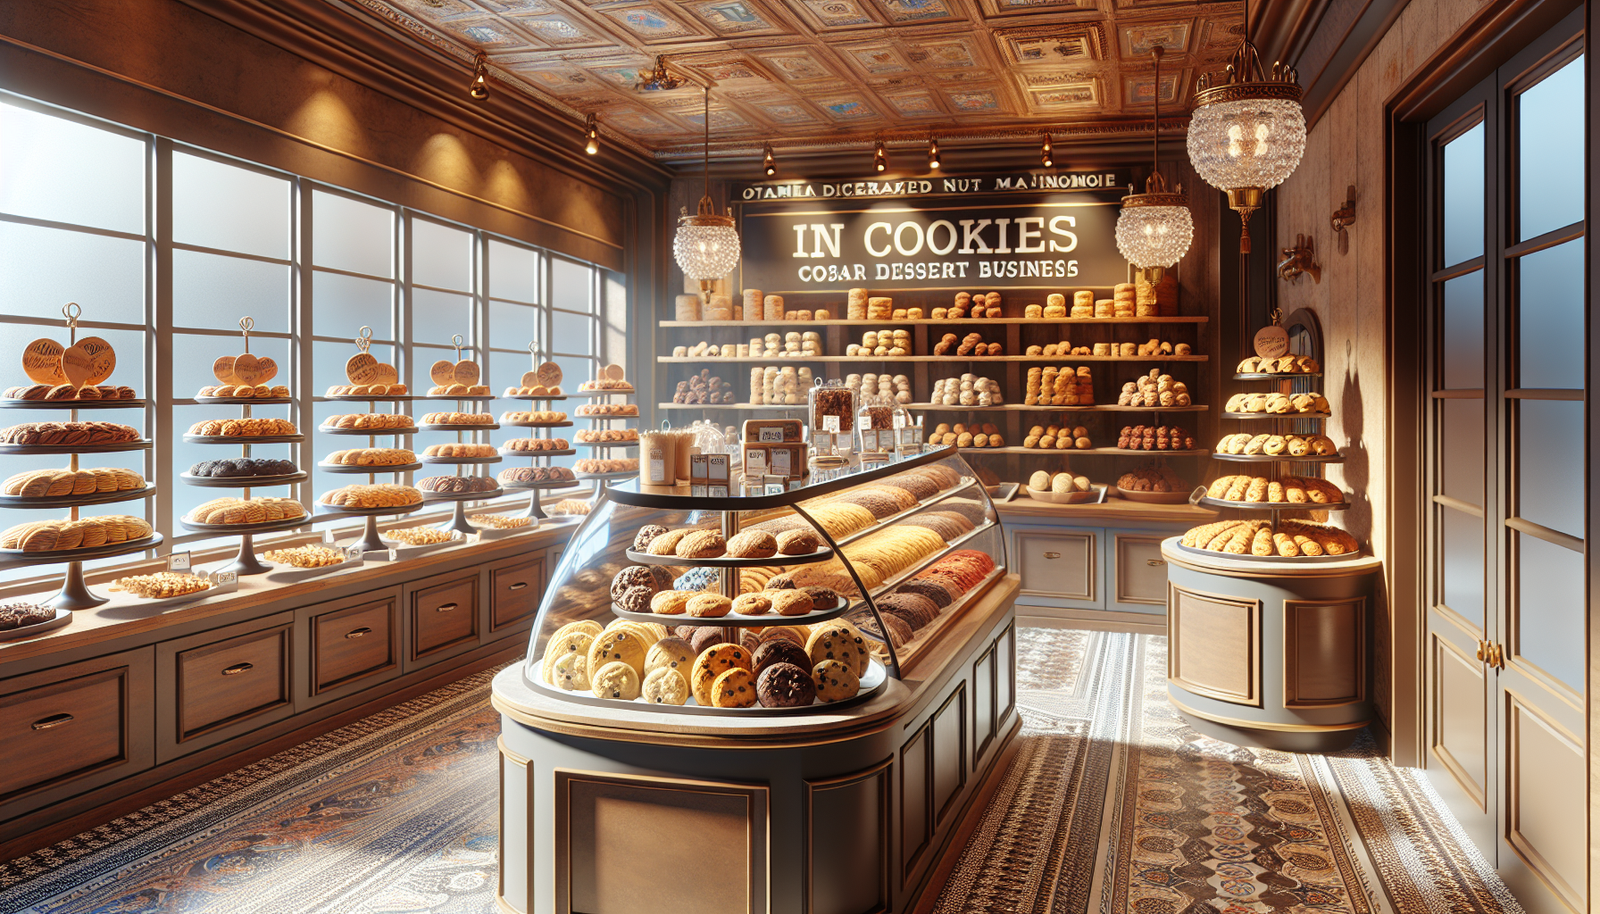 Insomnia Cookies Expands to Upper East Side